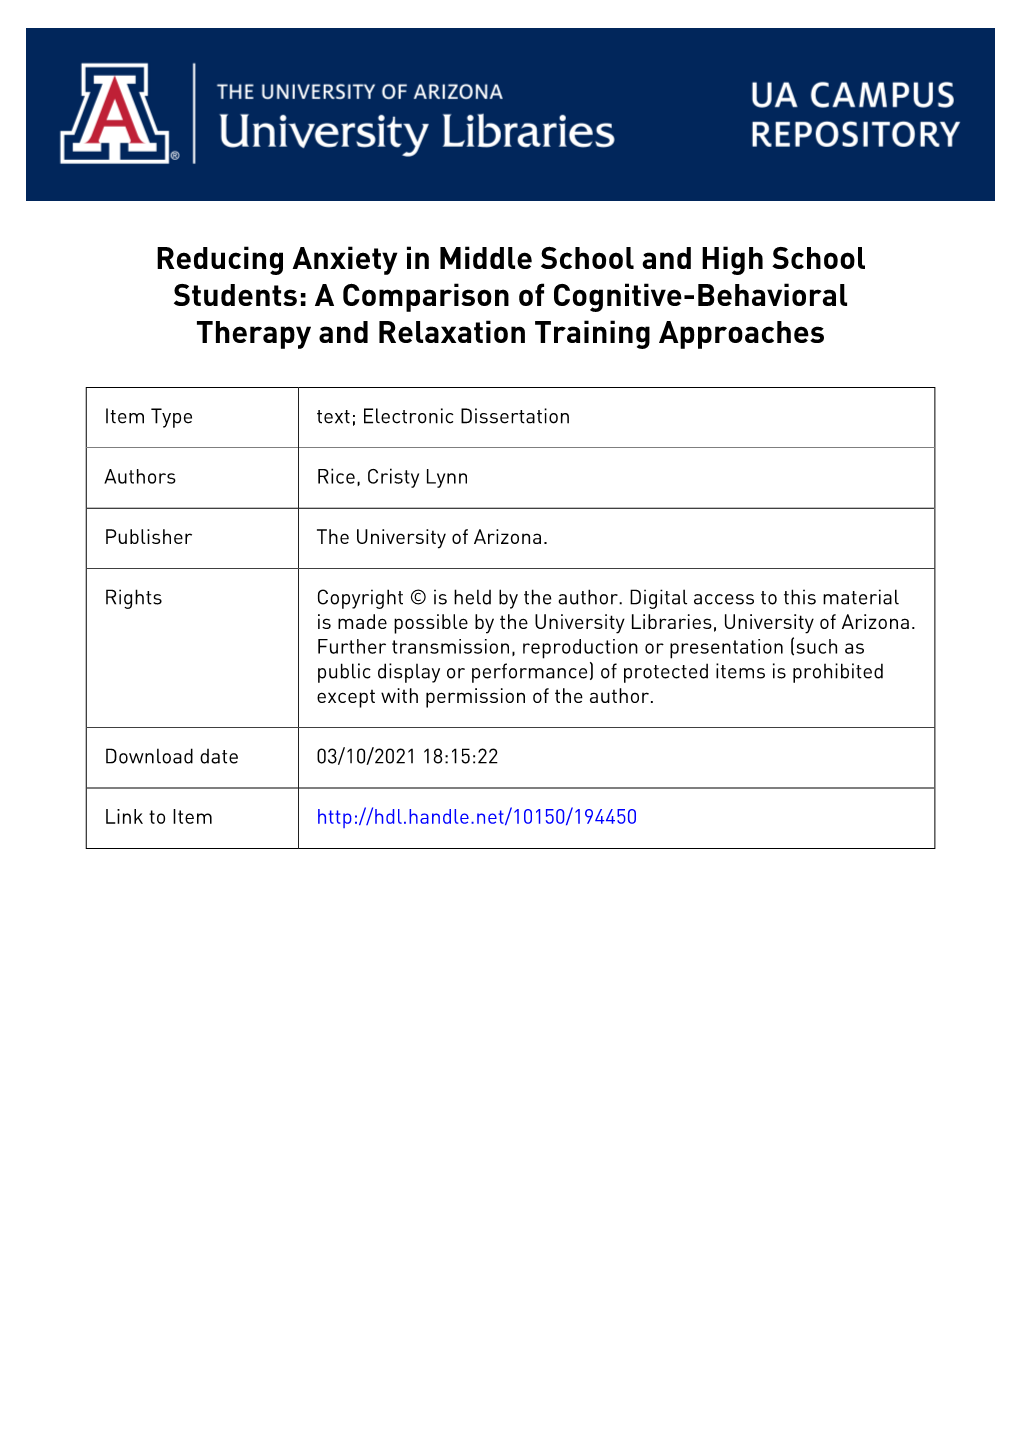 Reducing Anxiety in Middle School and High School Students: a Comparison of Cognitive-Behavioral Therapy and Relaxation Training Approaches